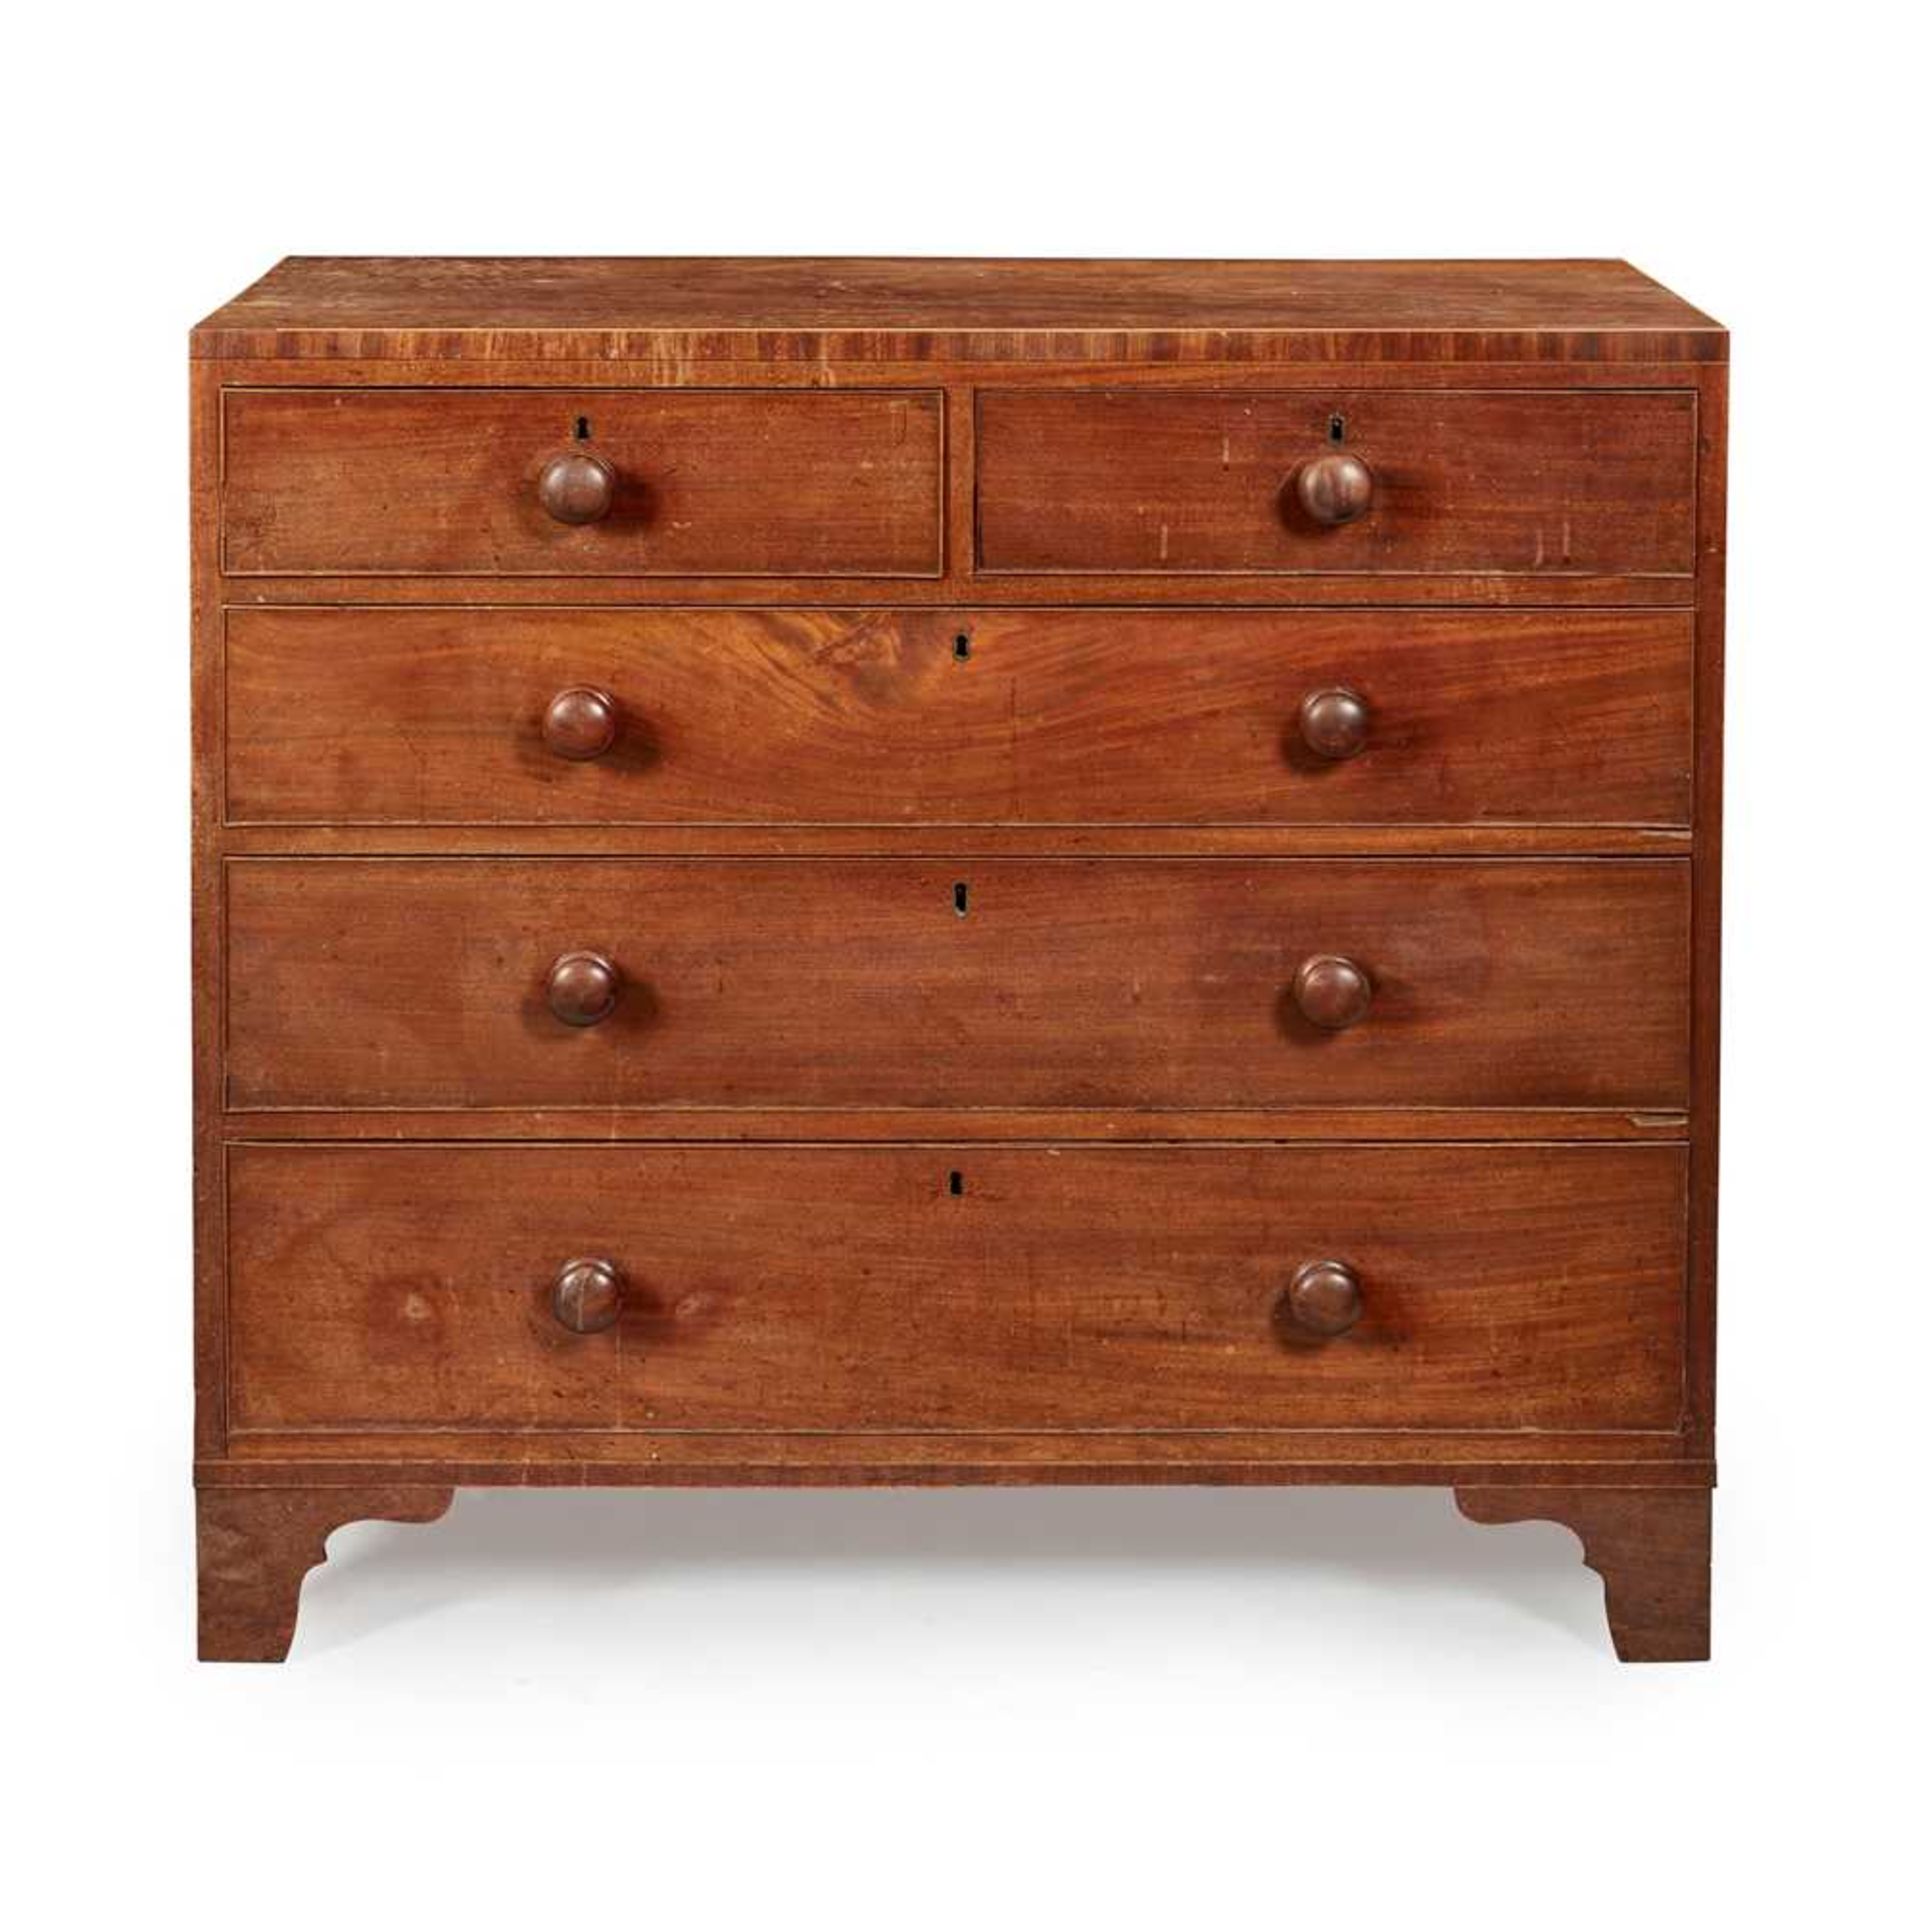 A LATE GEORGIAN MAHOGANY CHEST OF DRAWERS EARLY 19TH CENTURY